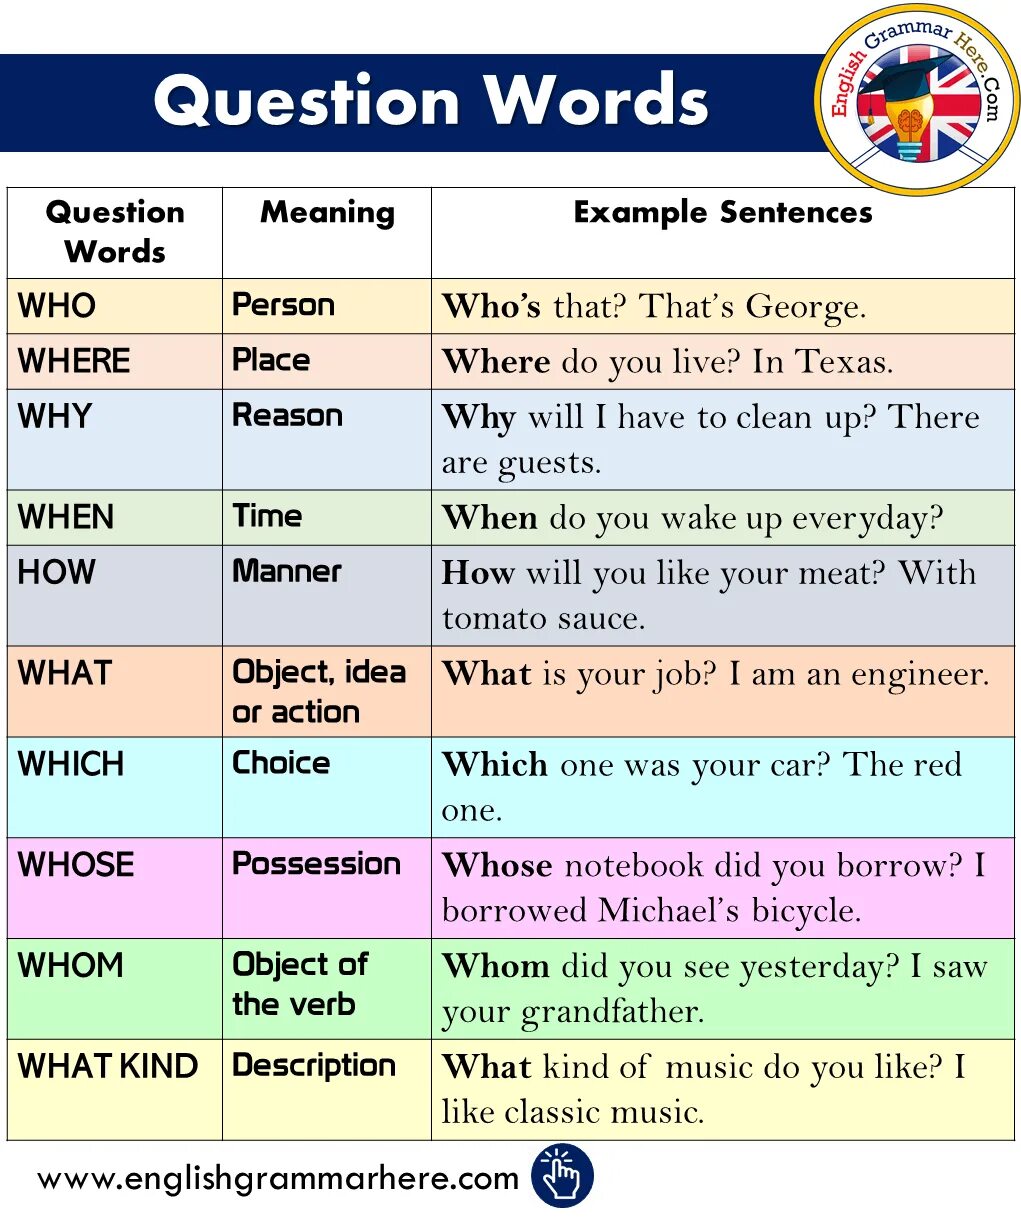 Match the sentences to their meanings. Вопросы с who в английском языке. Вопросы с what. Вопросы с who what в английском языке. Вопросы со словом who в английском языке.